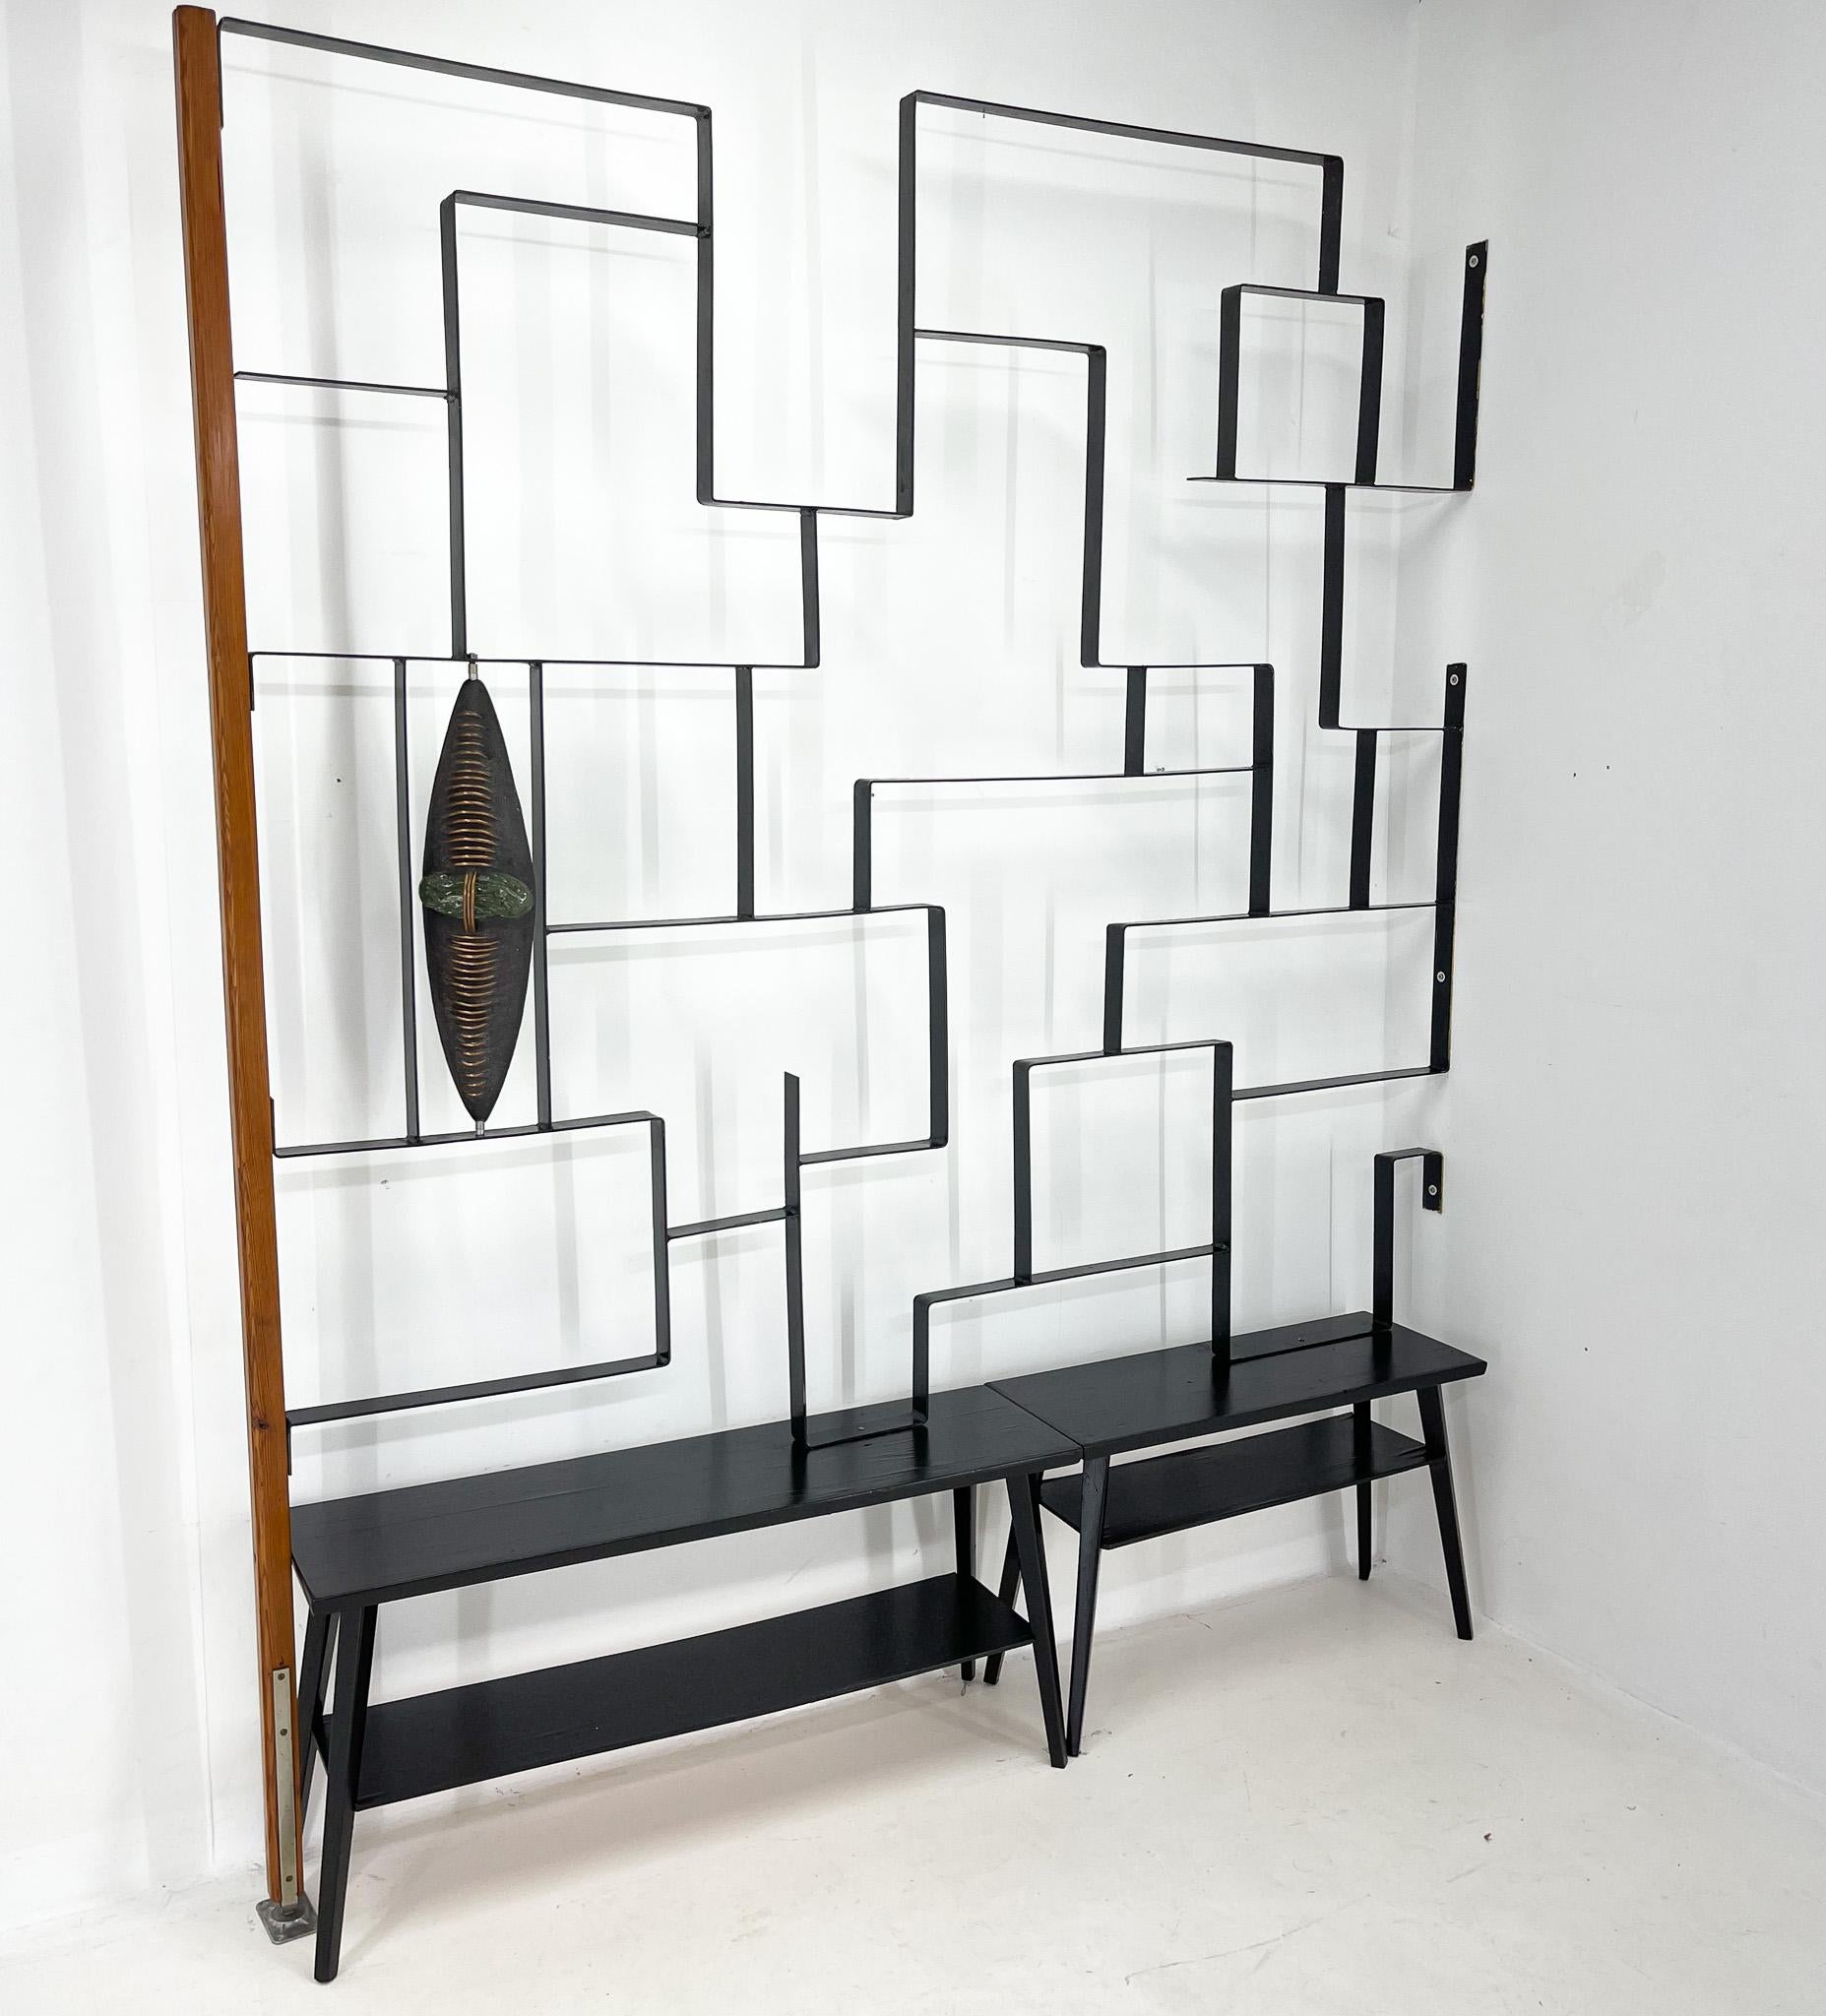 Unique mid-century artistic wall unit or room divider made of metal with two wooden benches and sculpture by Jelínek (signed).